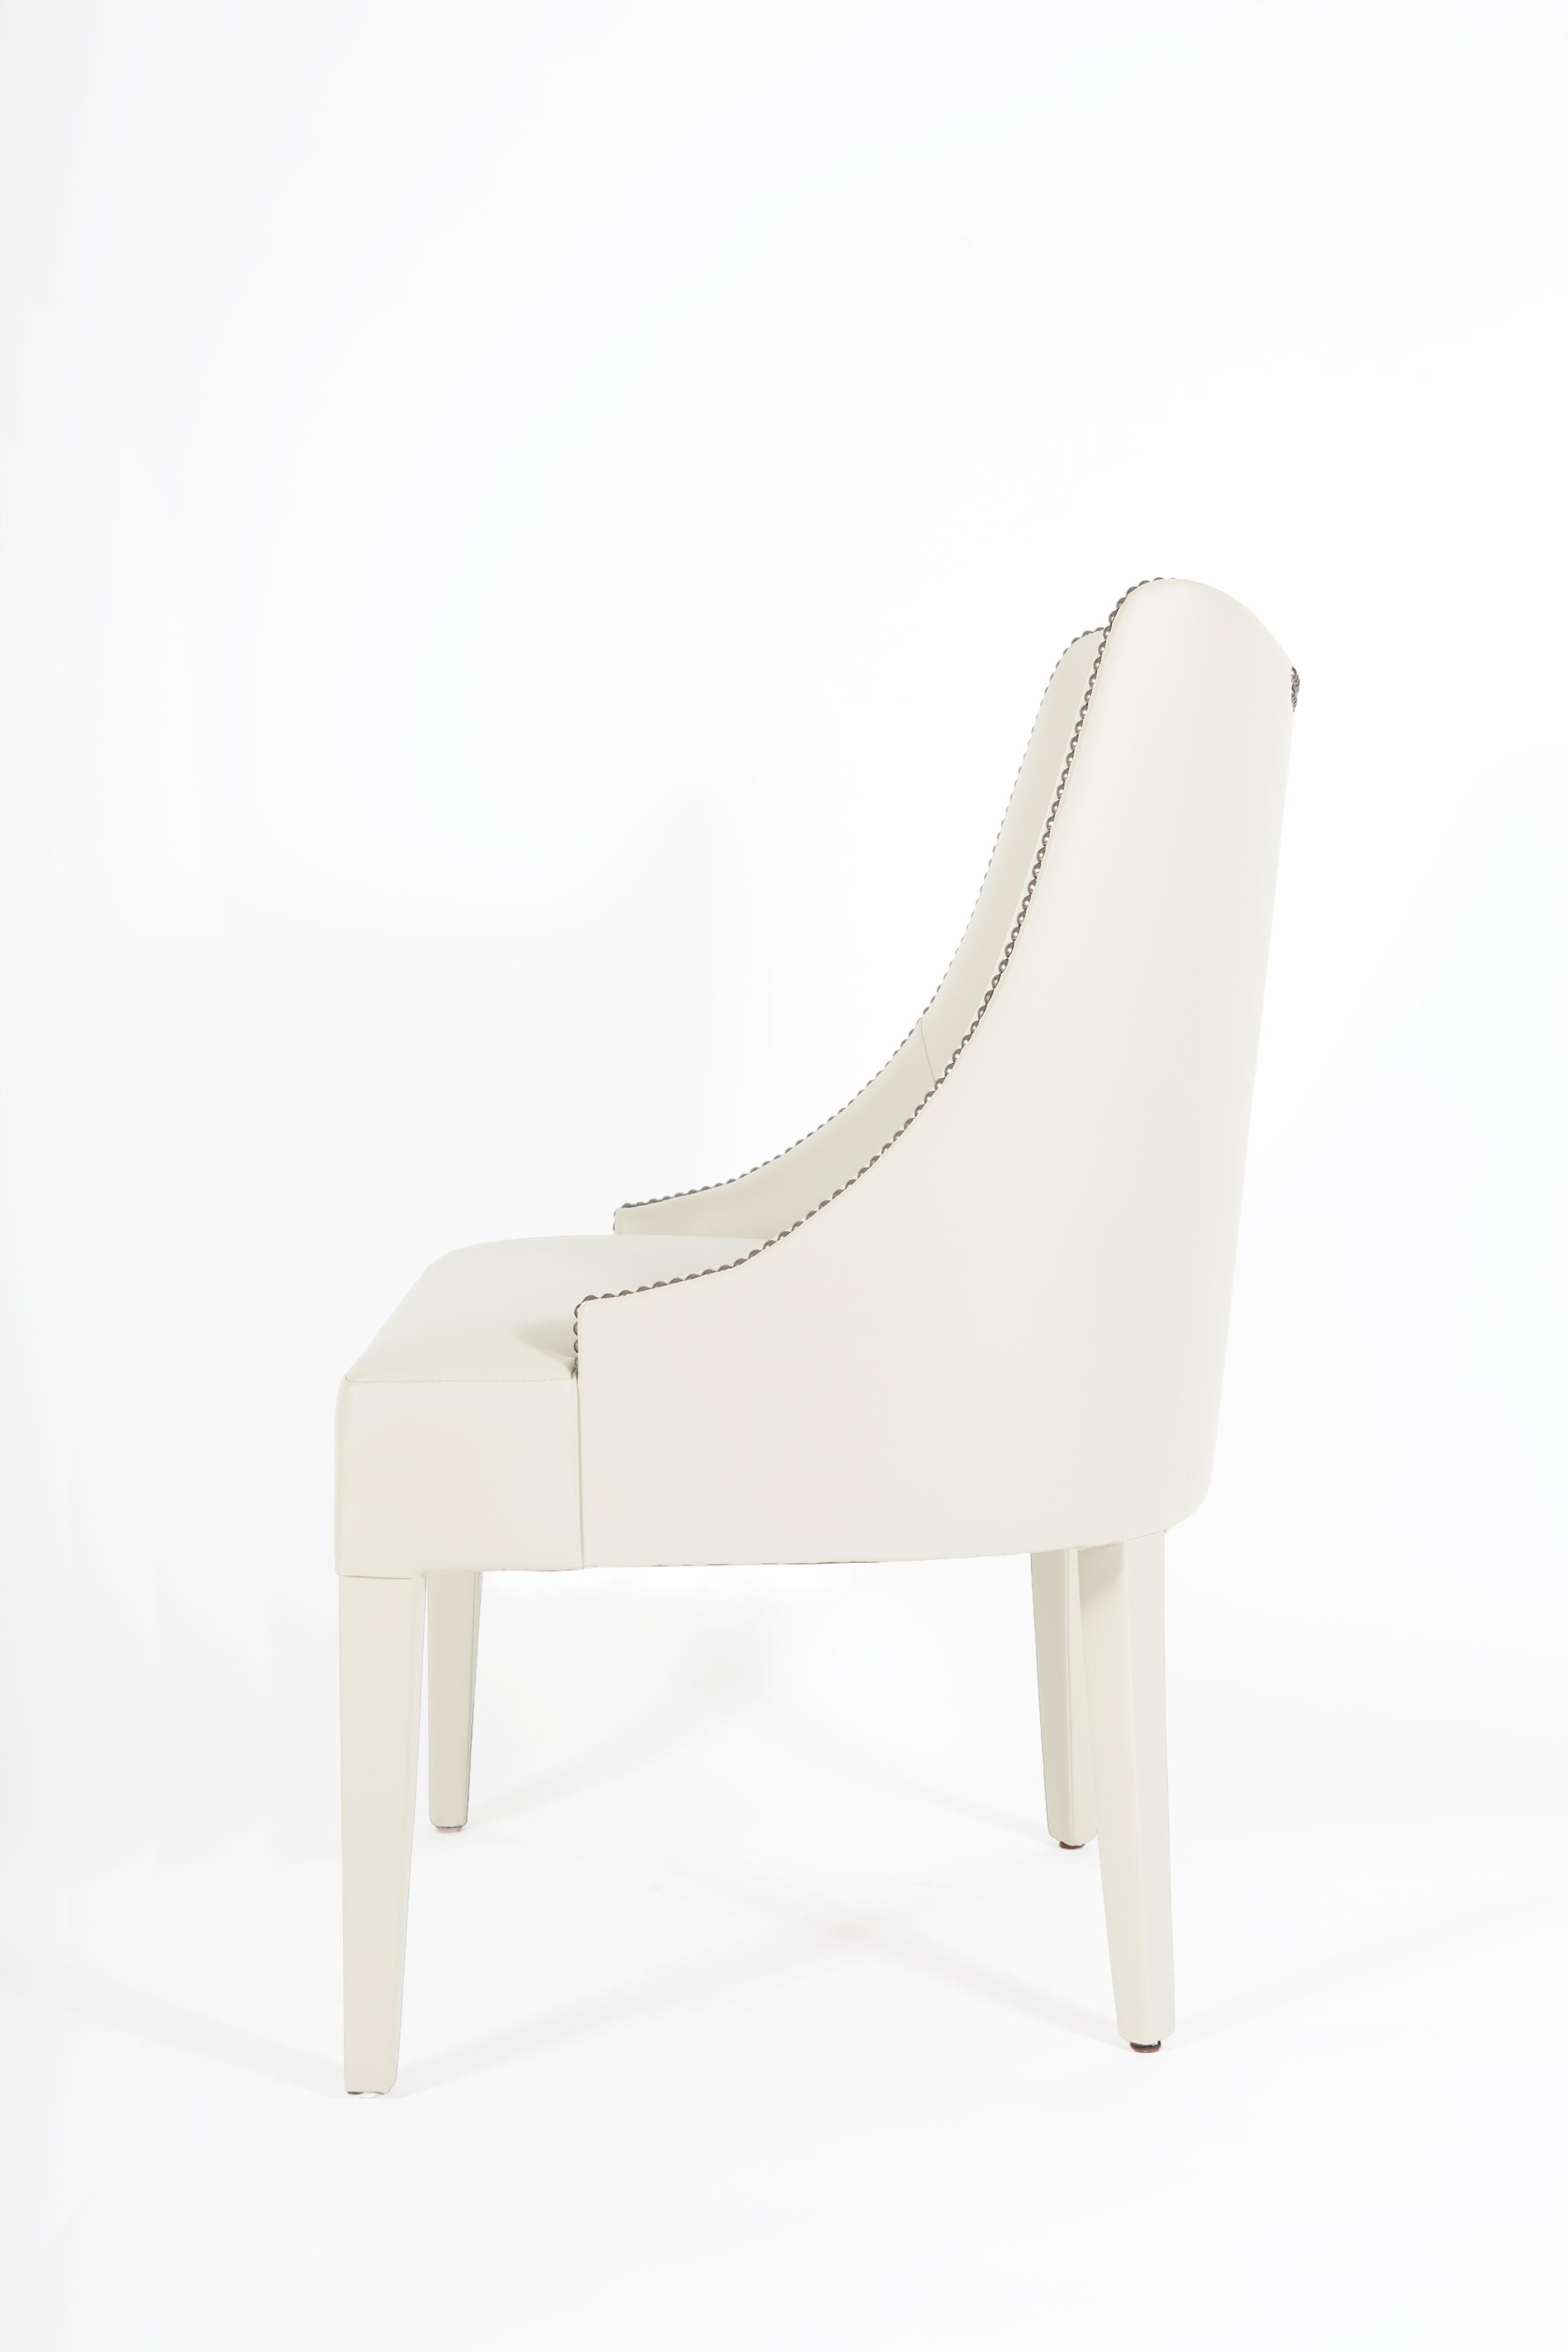 Velvet Modern Classic Dining Chairs with Nail Trim Detailing By Munna Design For Sale